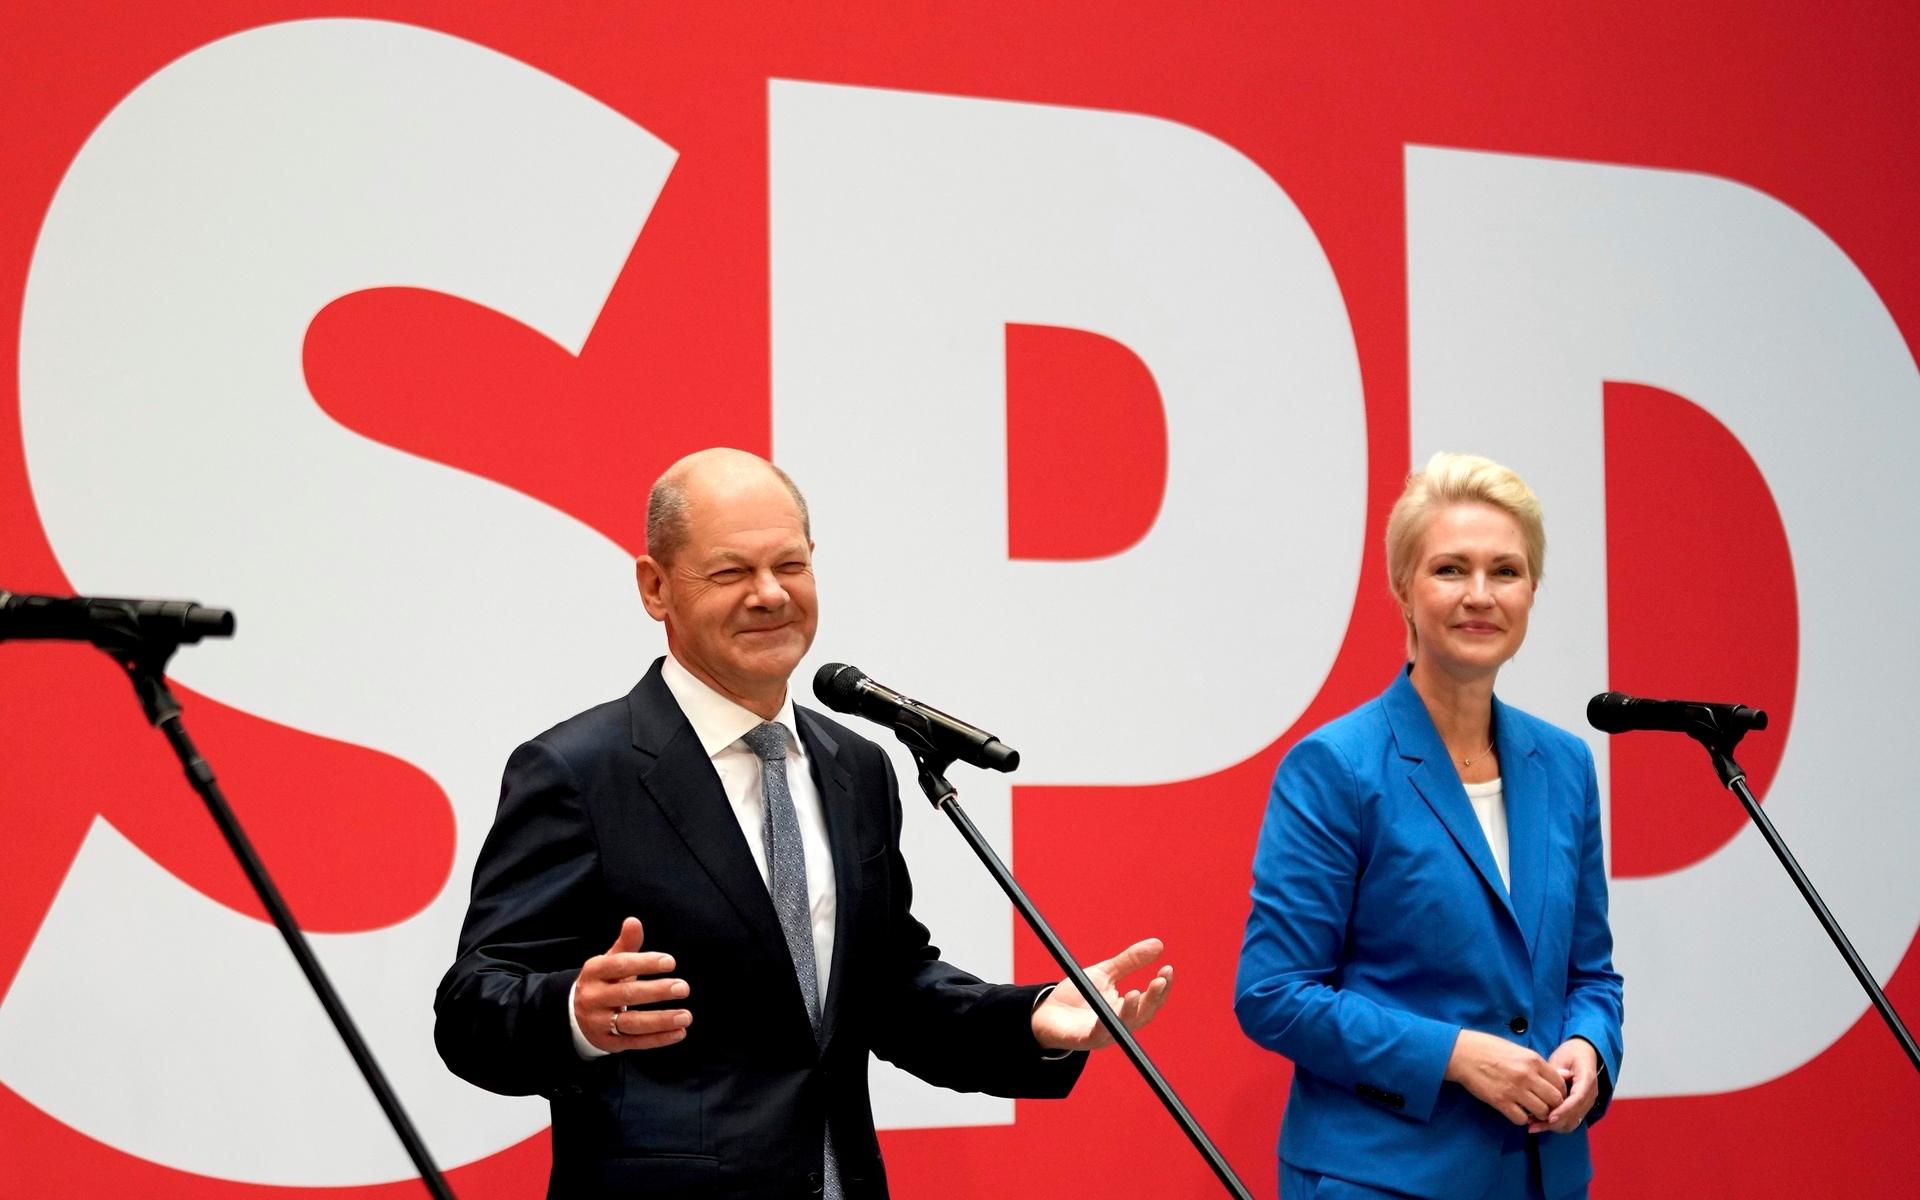 Olaf Scholz, left, top candidate for chancellor of the Social Democratic Party (SPD), and Manuela Schwesig, right, member of the SPD and governor of the German state of Mecklenburg-Western Pomerania, arrive fo a press statement at the party&apos;s headquarter in Berlin, Germany, Monday, Sept. 27, 2021. The center-left Social Democrats have won the biggest share of the vote in Germany&apos;s national election. They narrowly beat outgoing Chancellor Angela Merkel&apos;s center-right Union bloc in a closely fought race that will determine who succeeds the long-time leader at the helm of Europe&apos;s biggest economy. (AP Photo/Michael Sohn)  SOB108